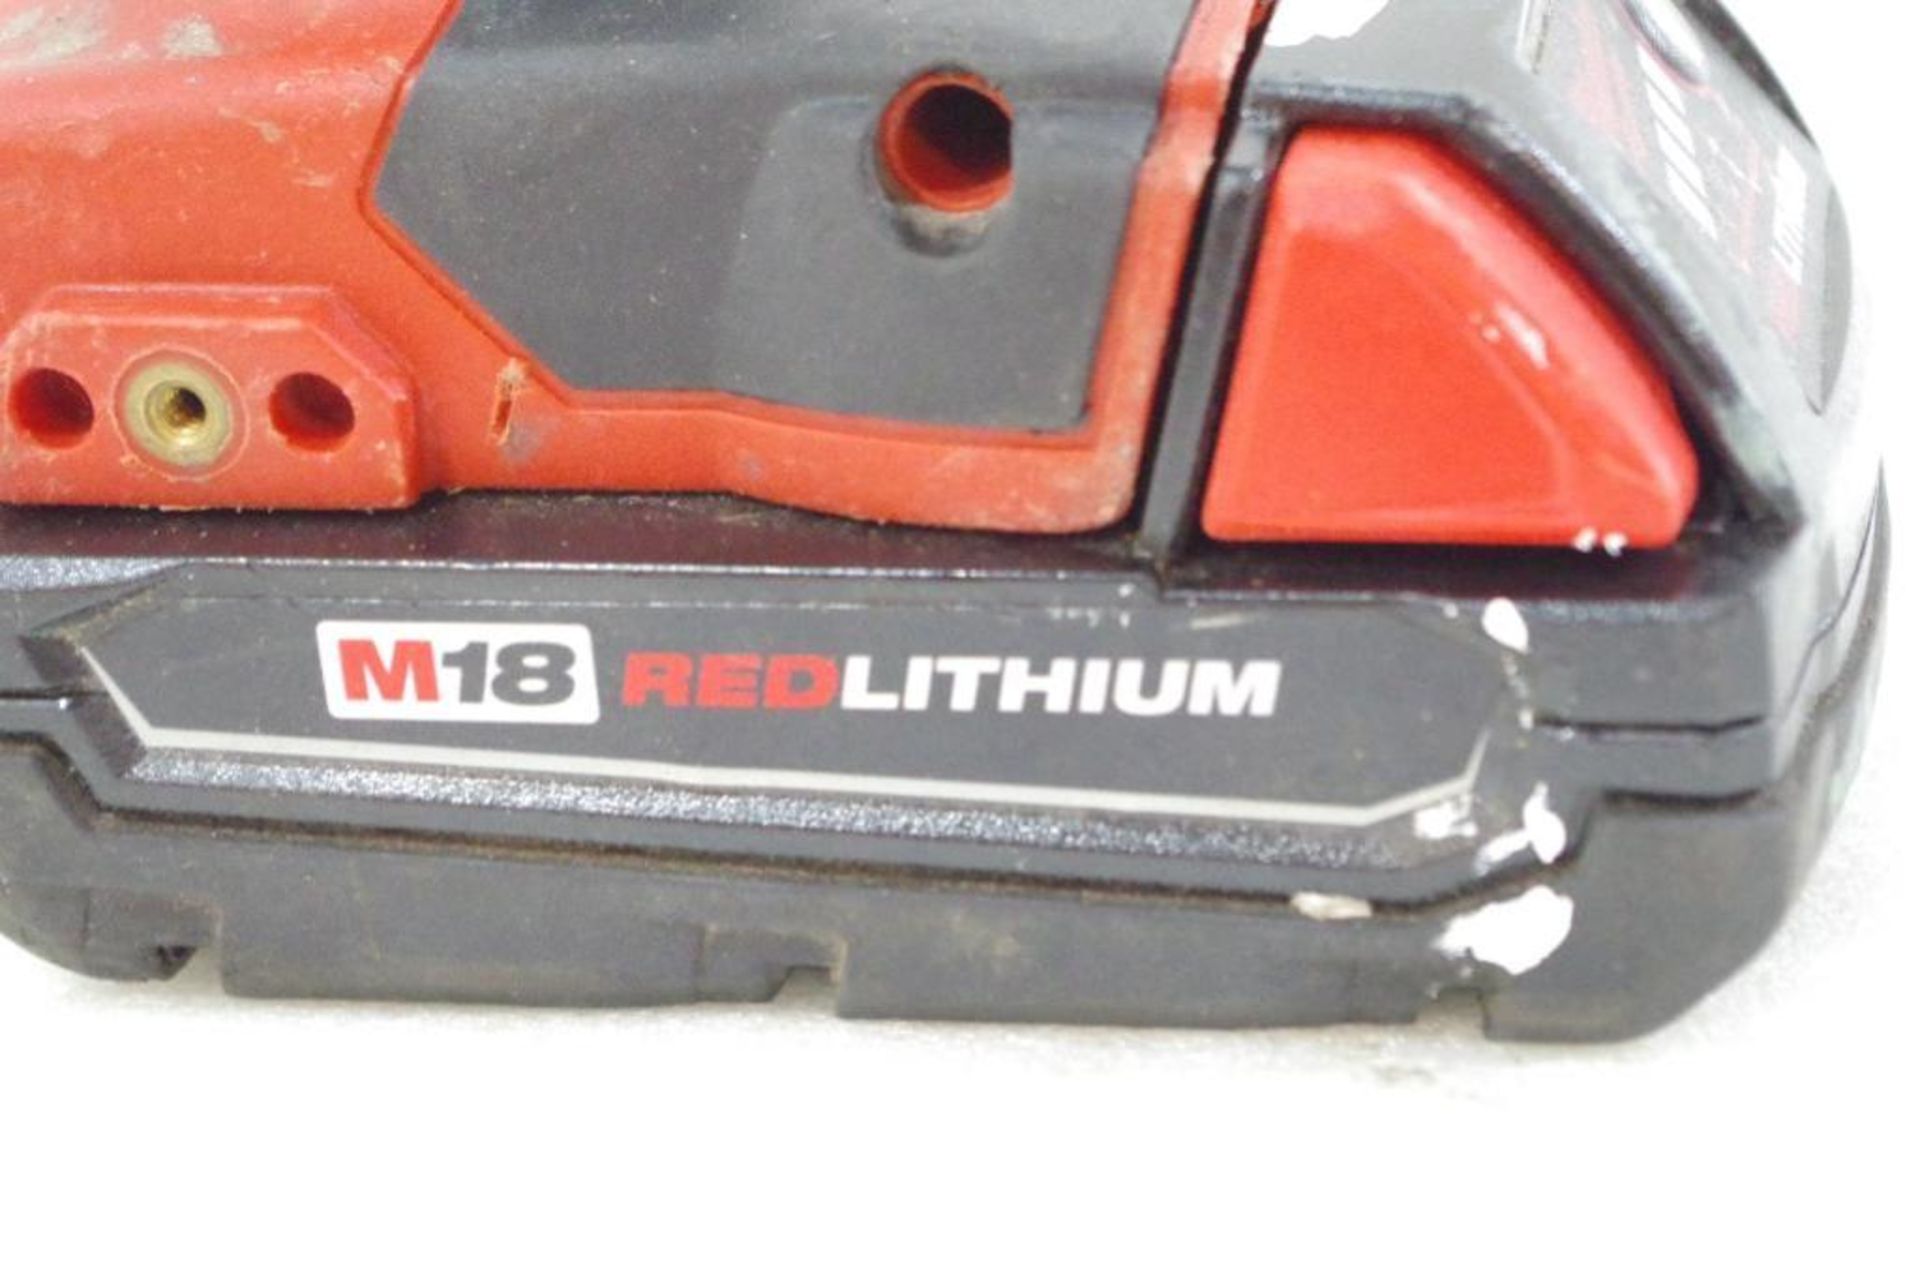 MILWAUKEE 18V 1/2" Hammer Drill, (1) Battery, NO Charger - Image 3 of 4